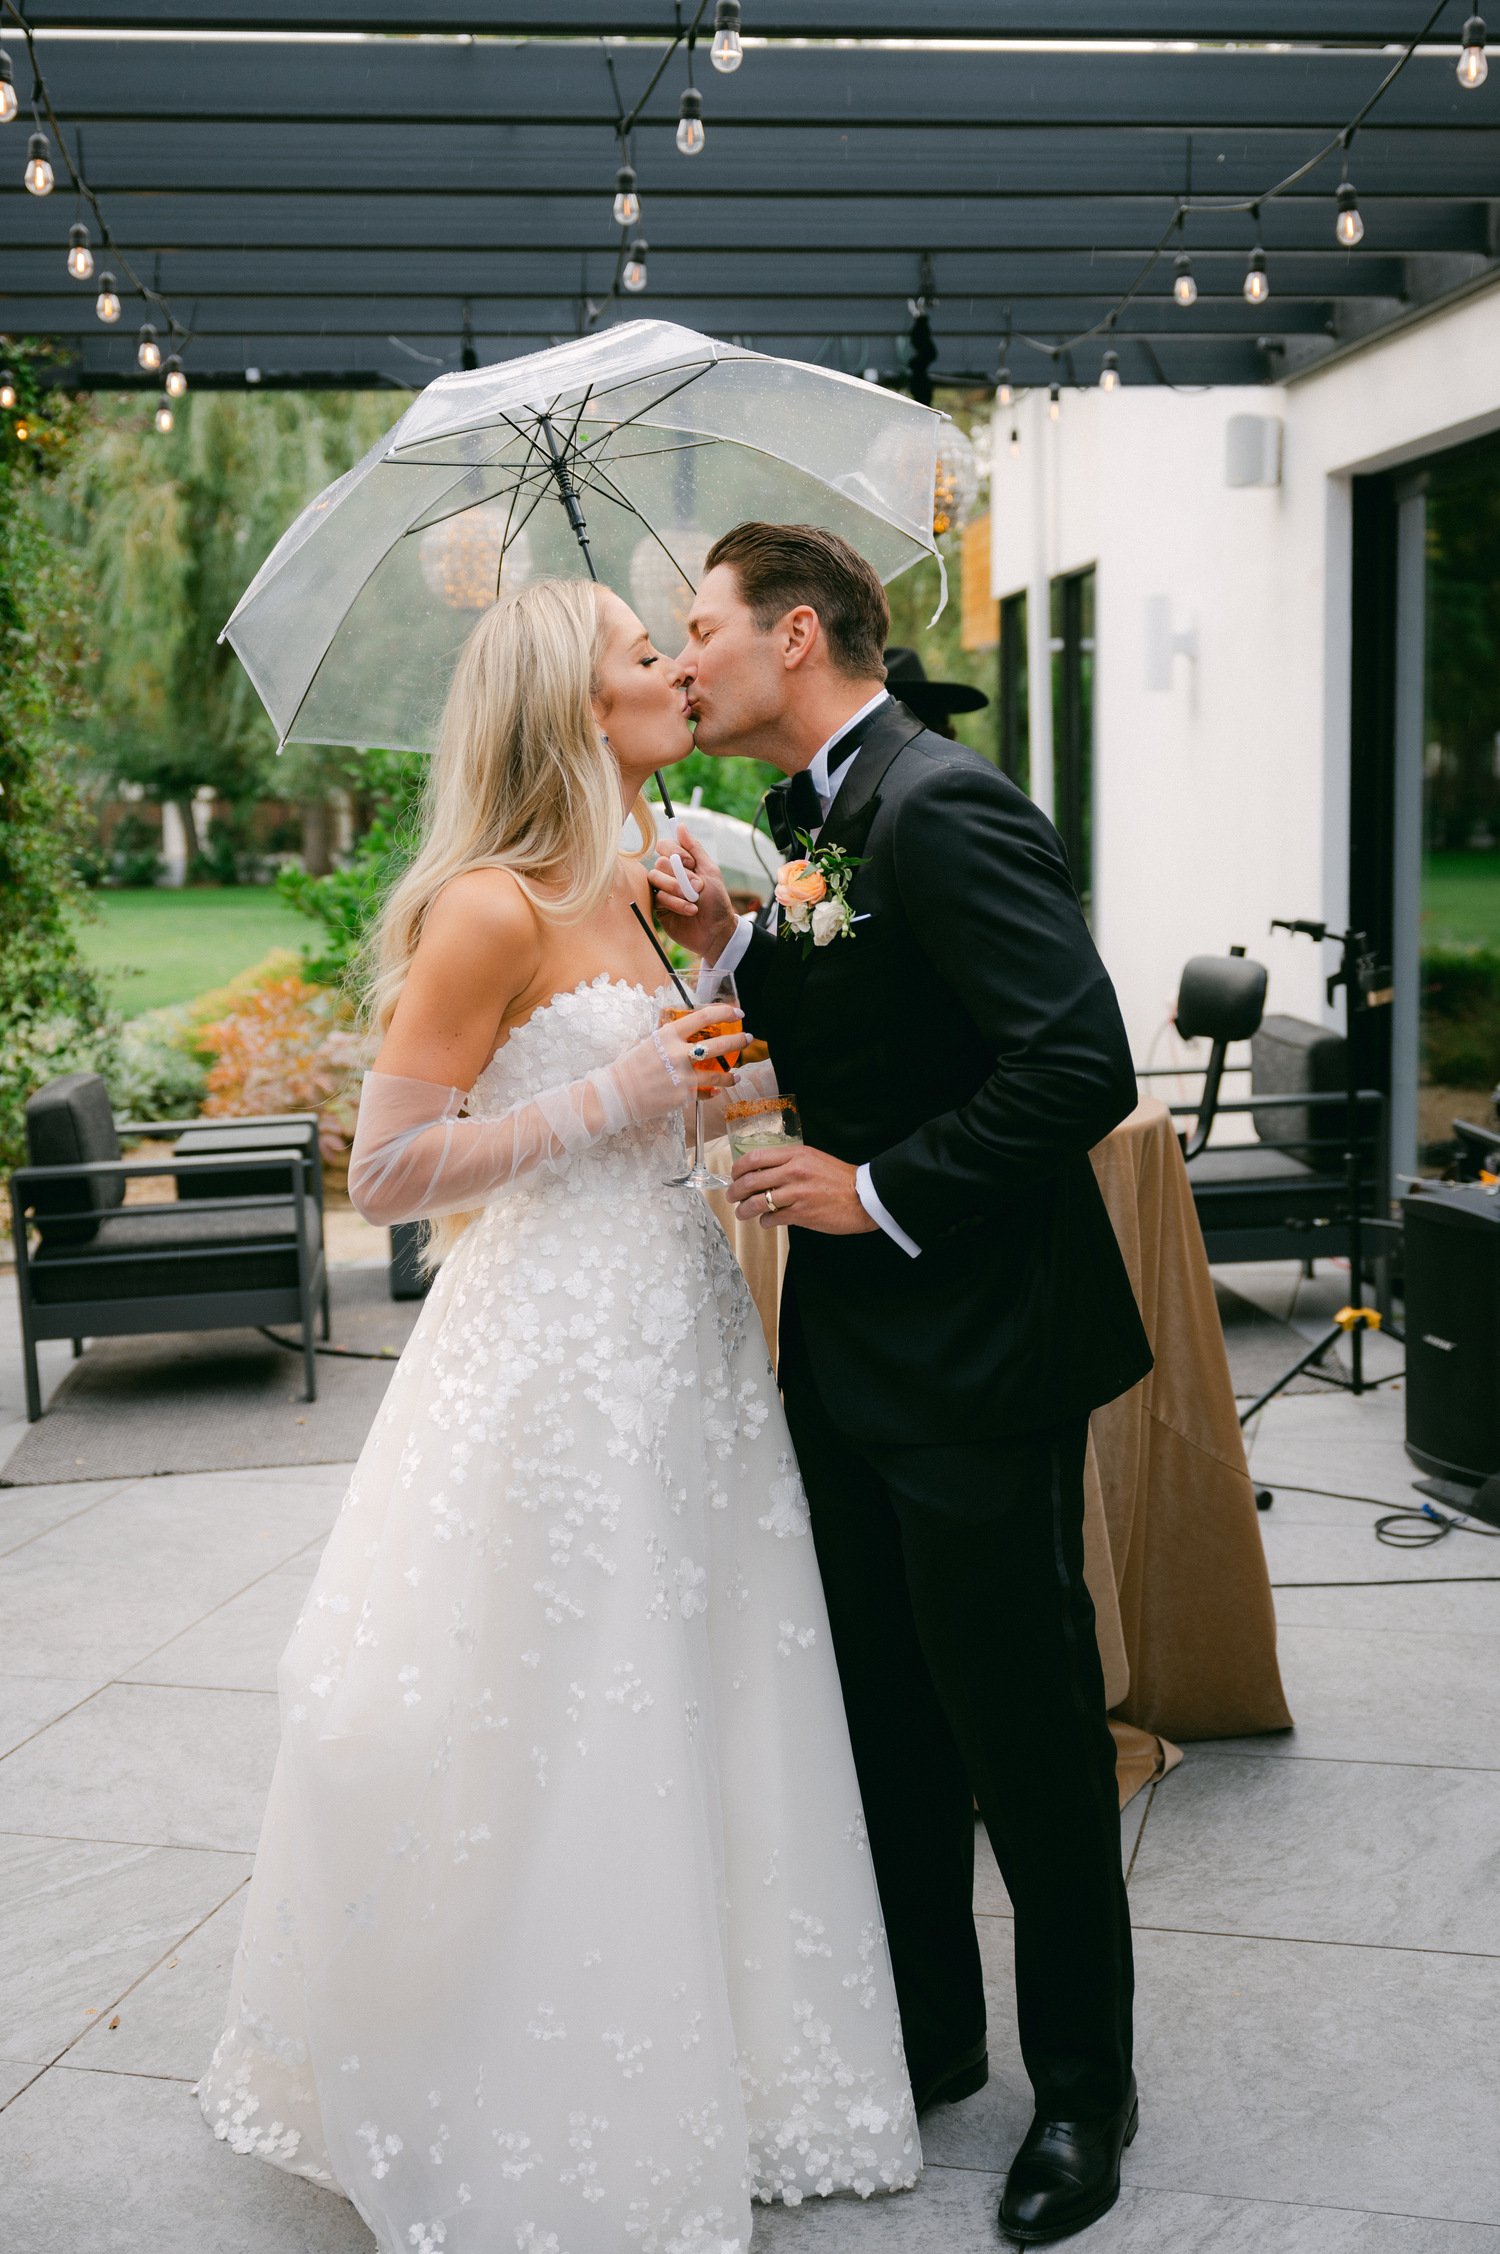 Elm Estate Wedding photos, photo of the newly wed couple kissing under a clear umbrella